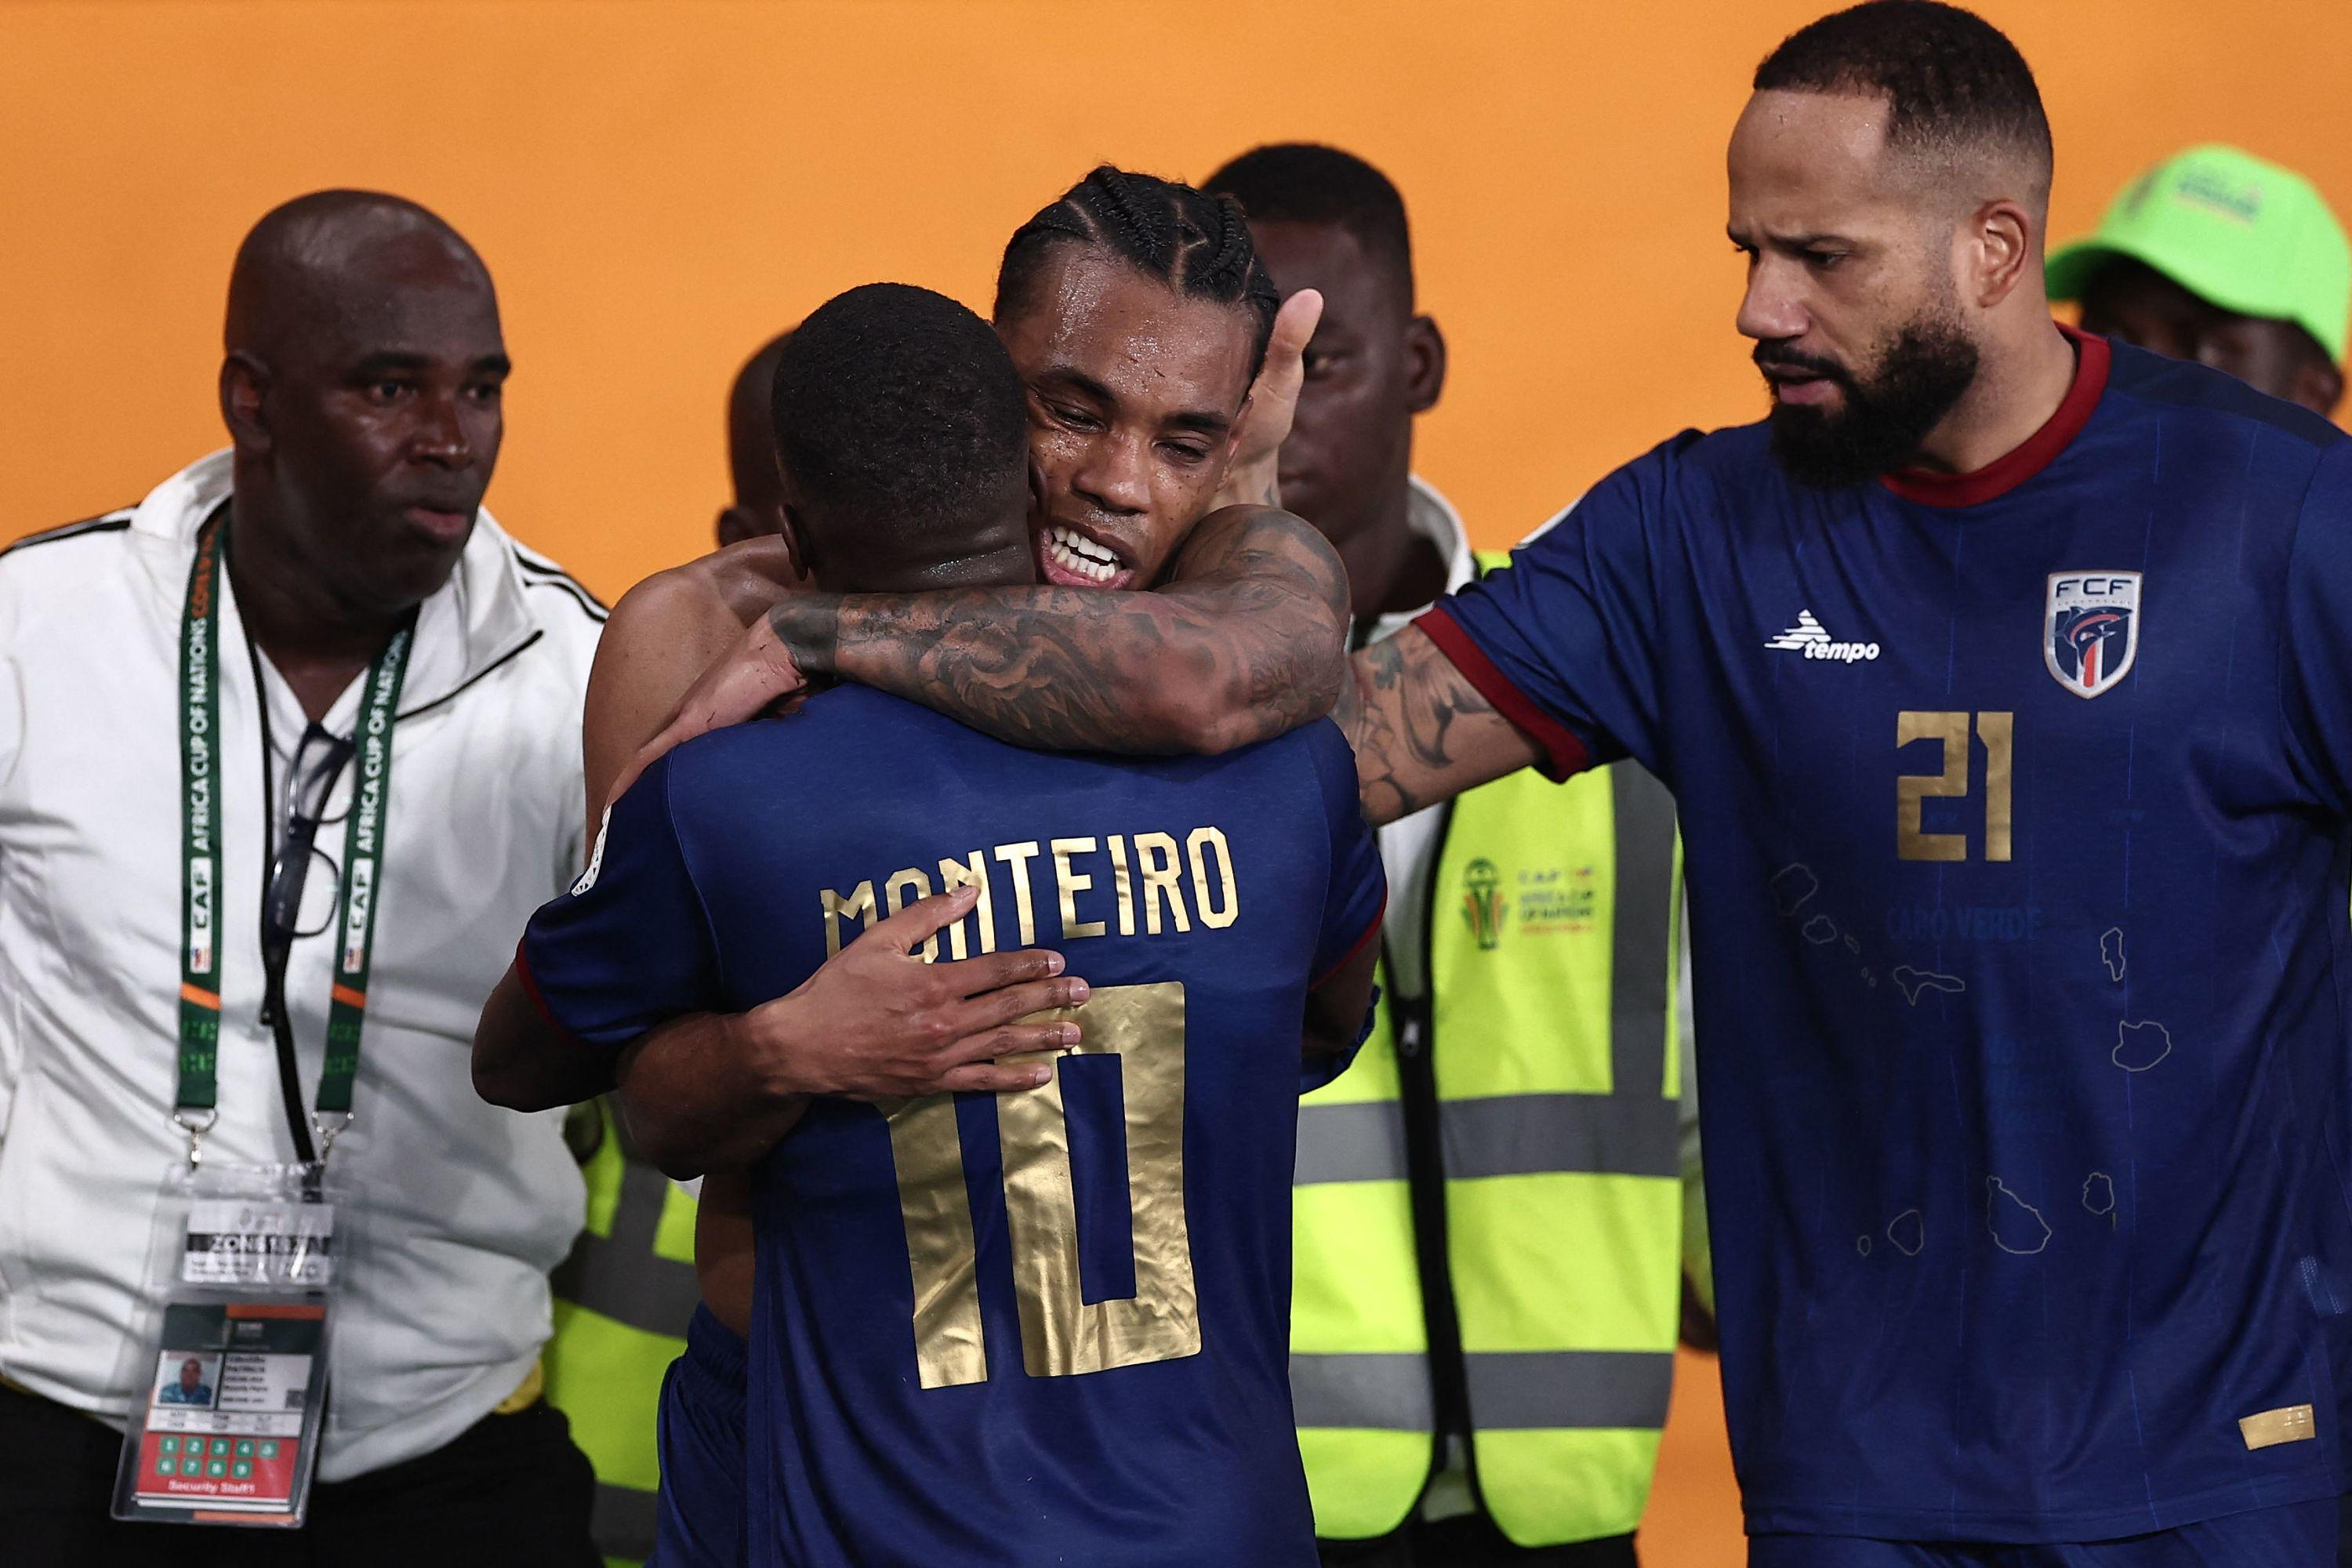 CAN: Cape Verde creates a sensation by dominating Ghana